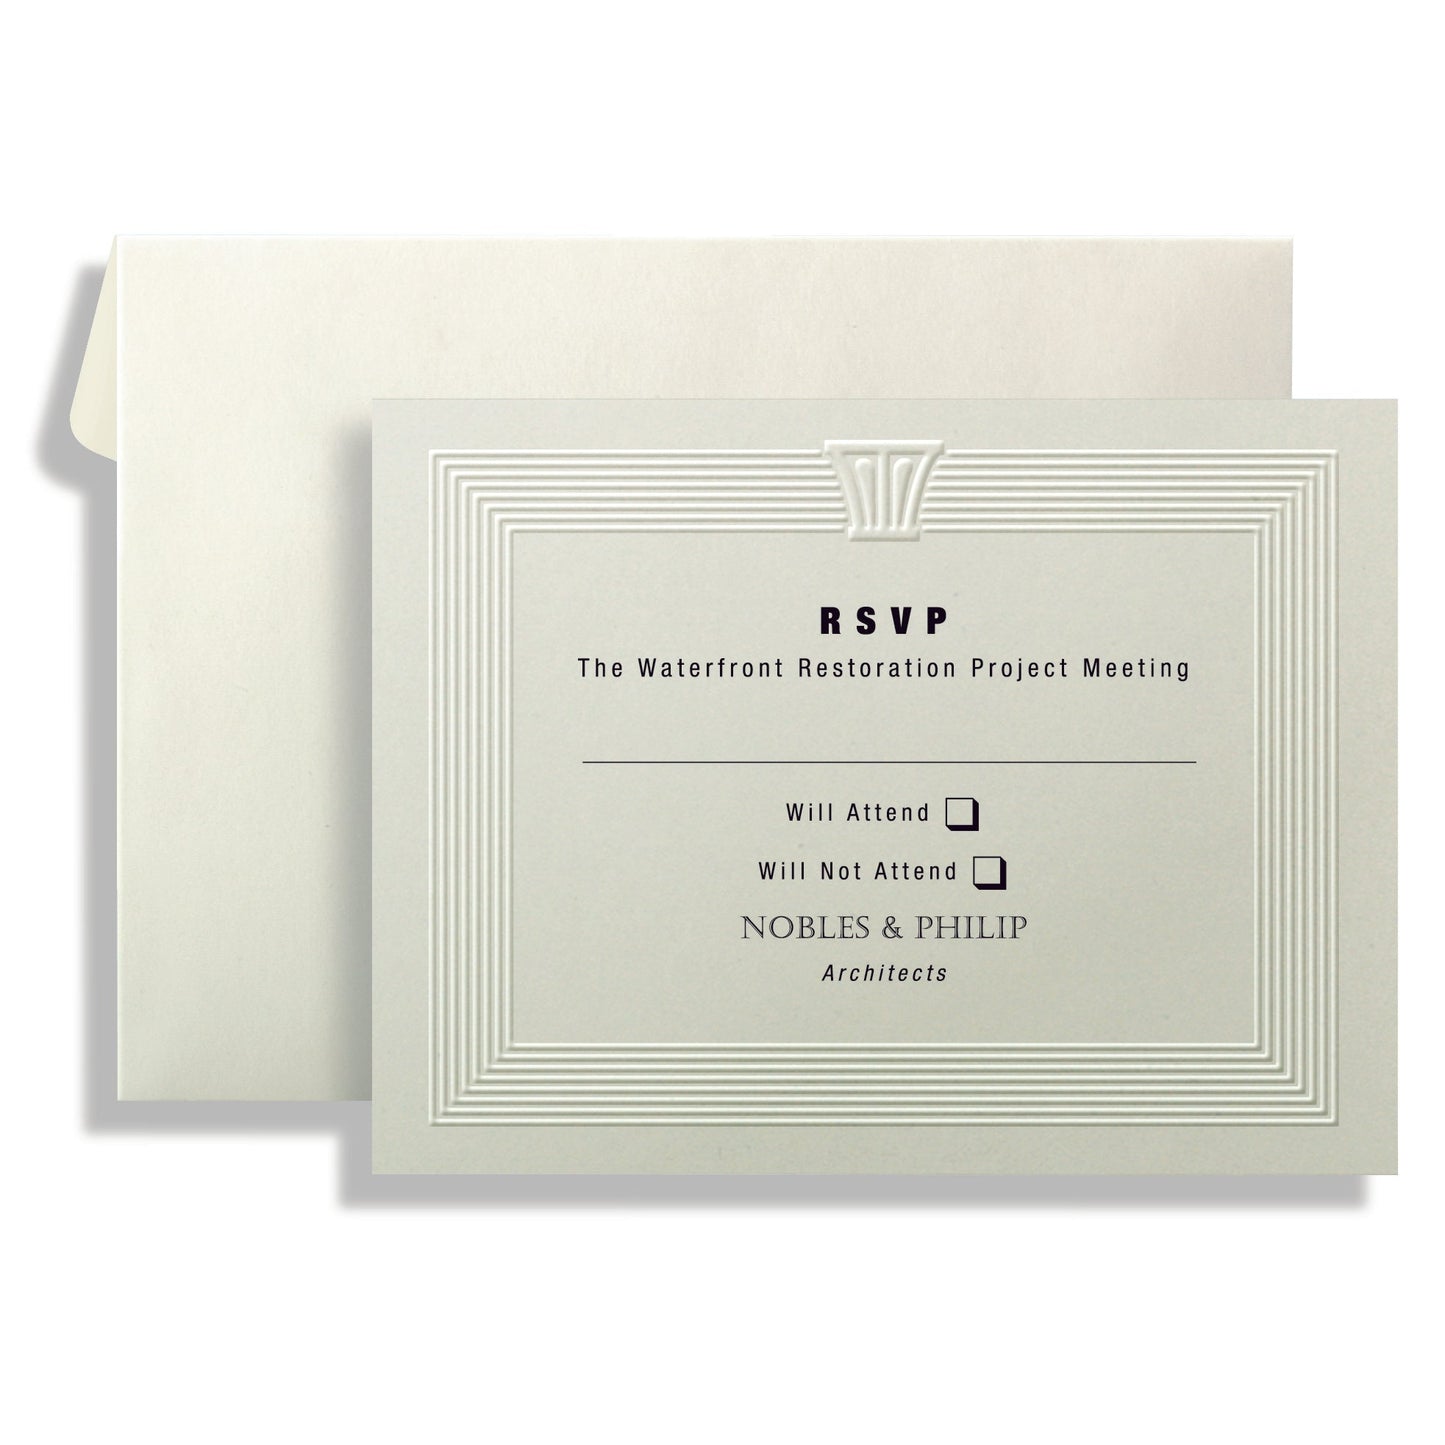 St. James® Overtures® Reply Cards, Capital Emboss, Ivory, 40 Sets